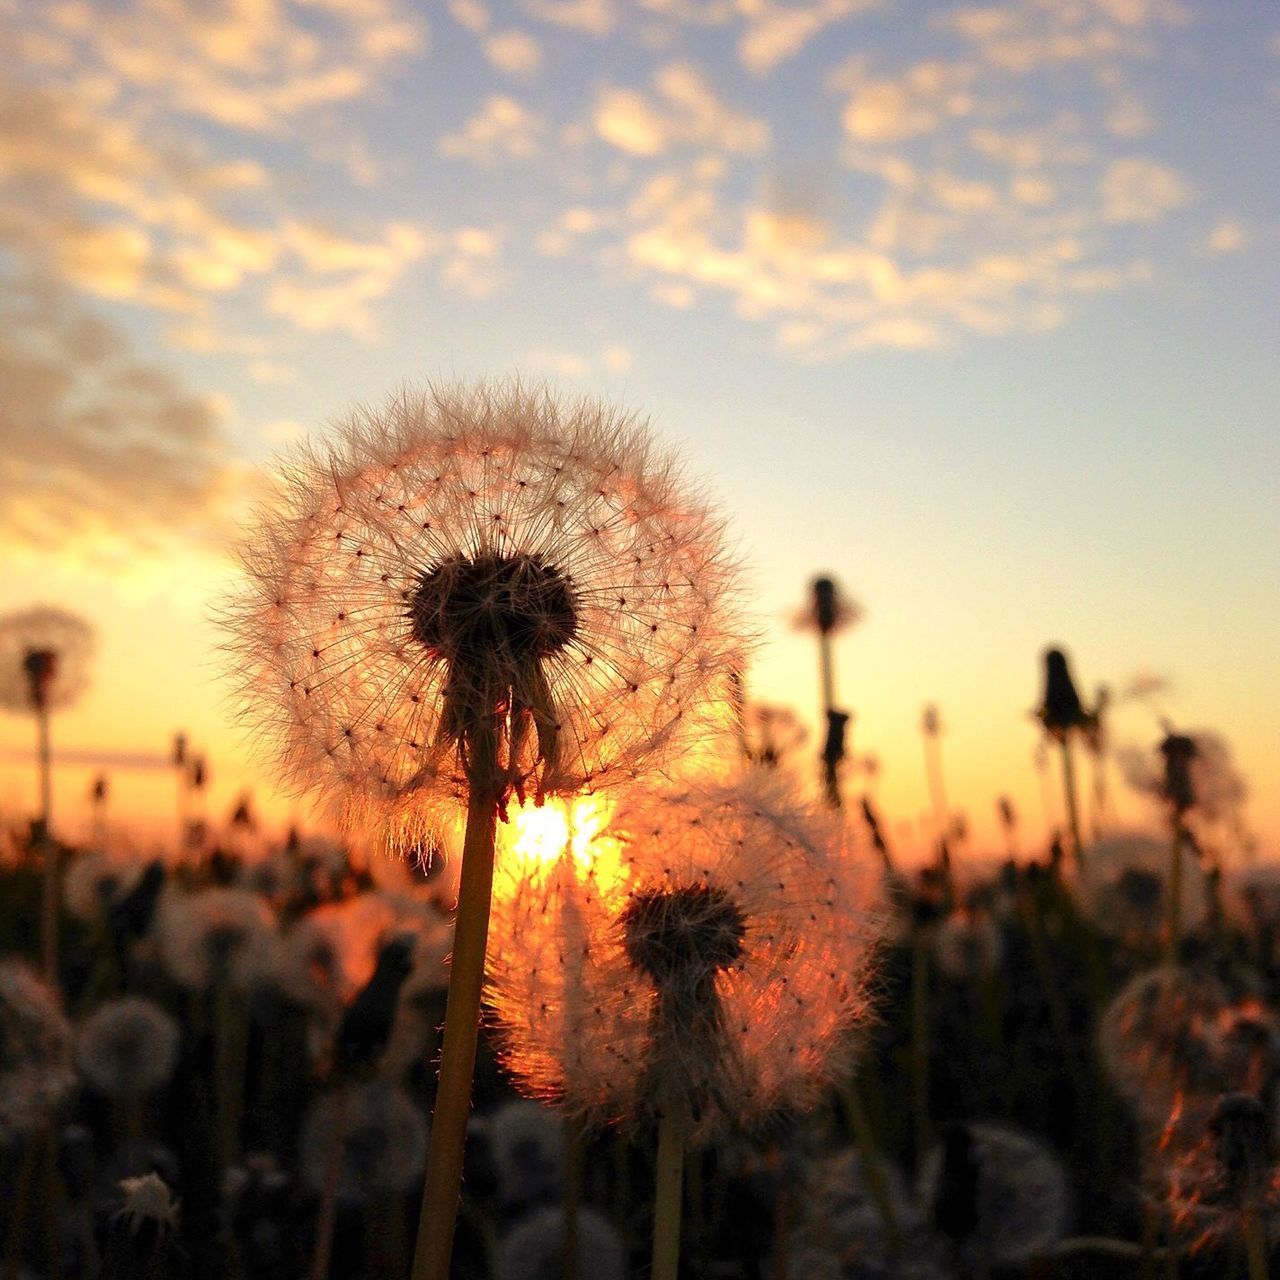 flower, dandelion, growth, sunset, beauty in nature, freshness, sky, fragility, flower head, nature, focus on foreground, stem, silhouette, plant, field, close-up, blooming, outdoors, uncultivated, in bloom